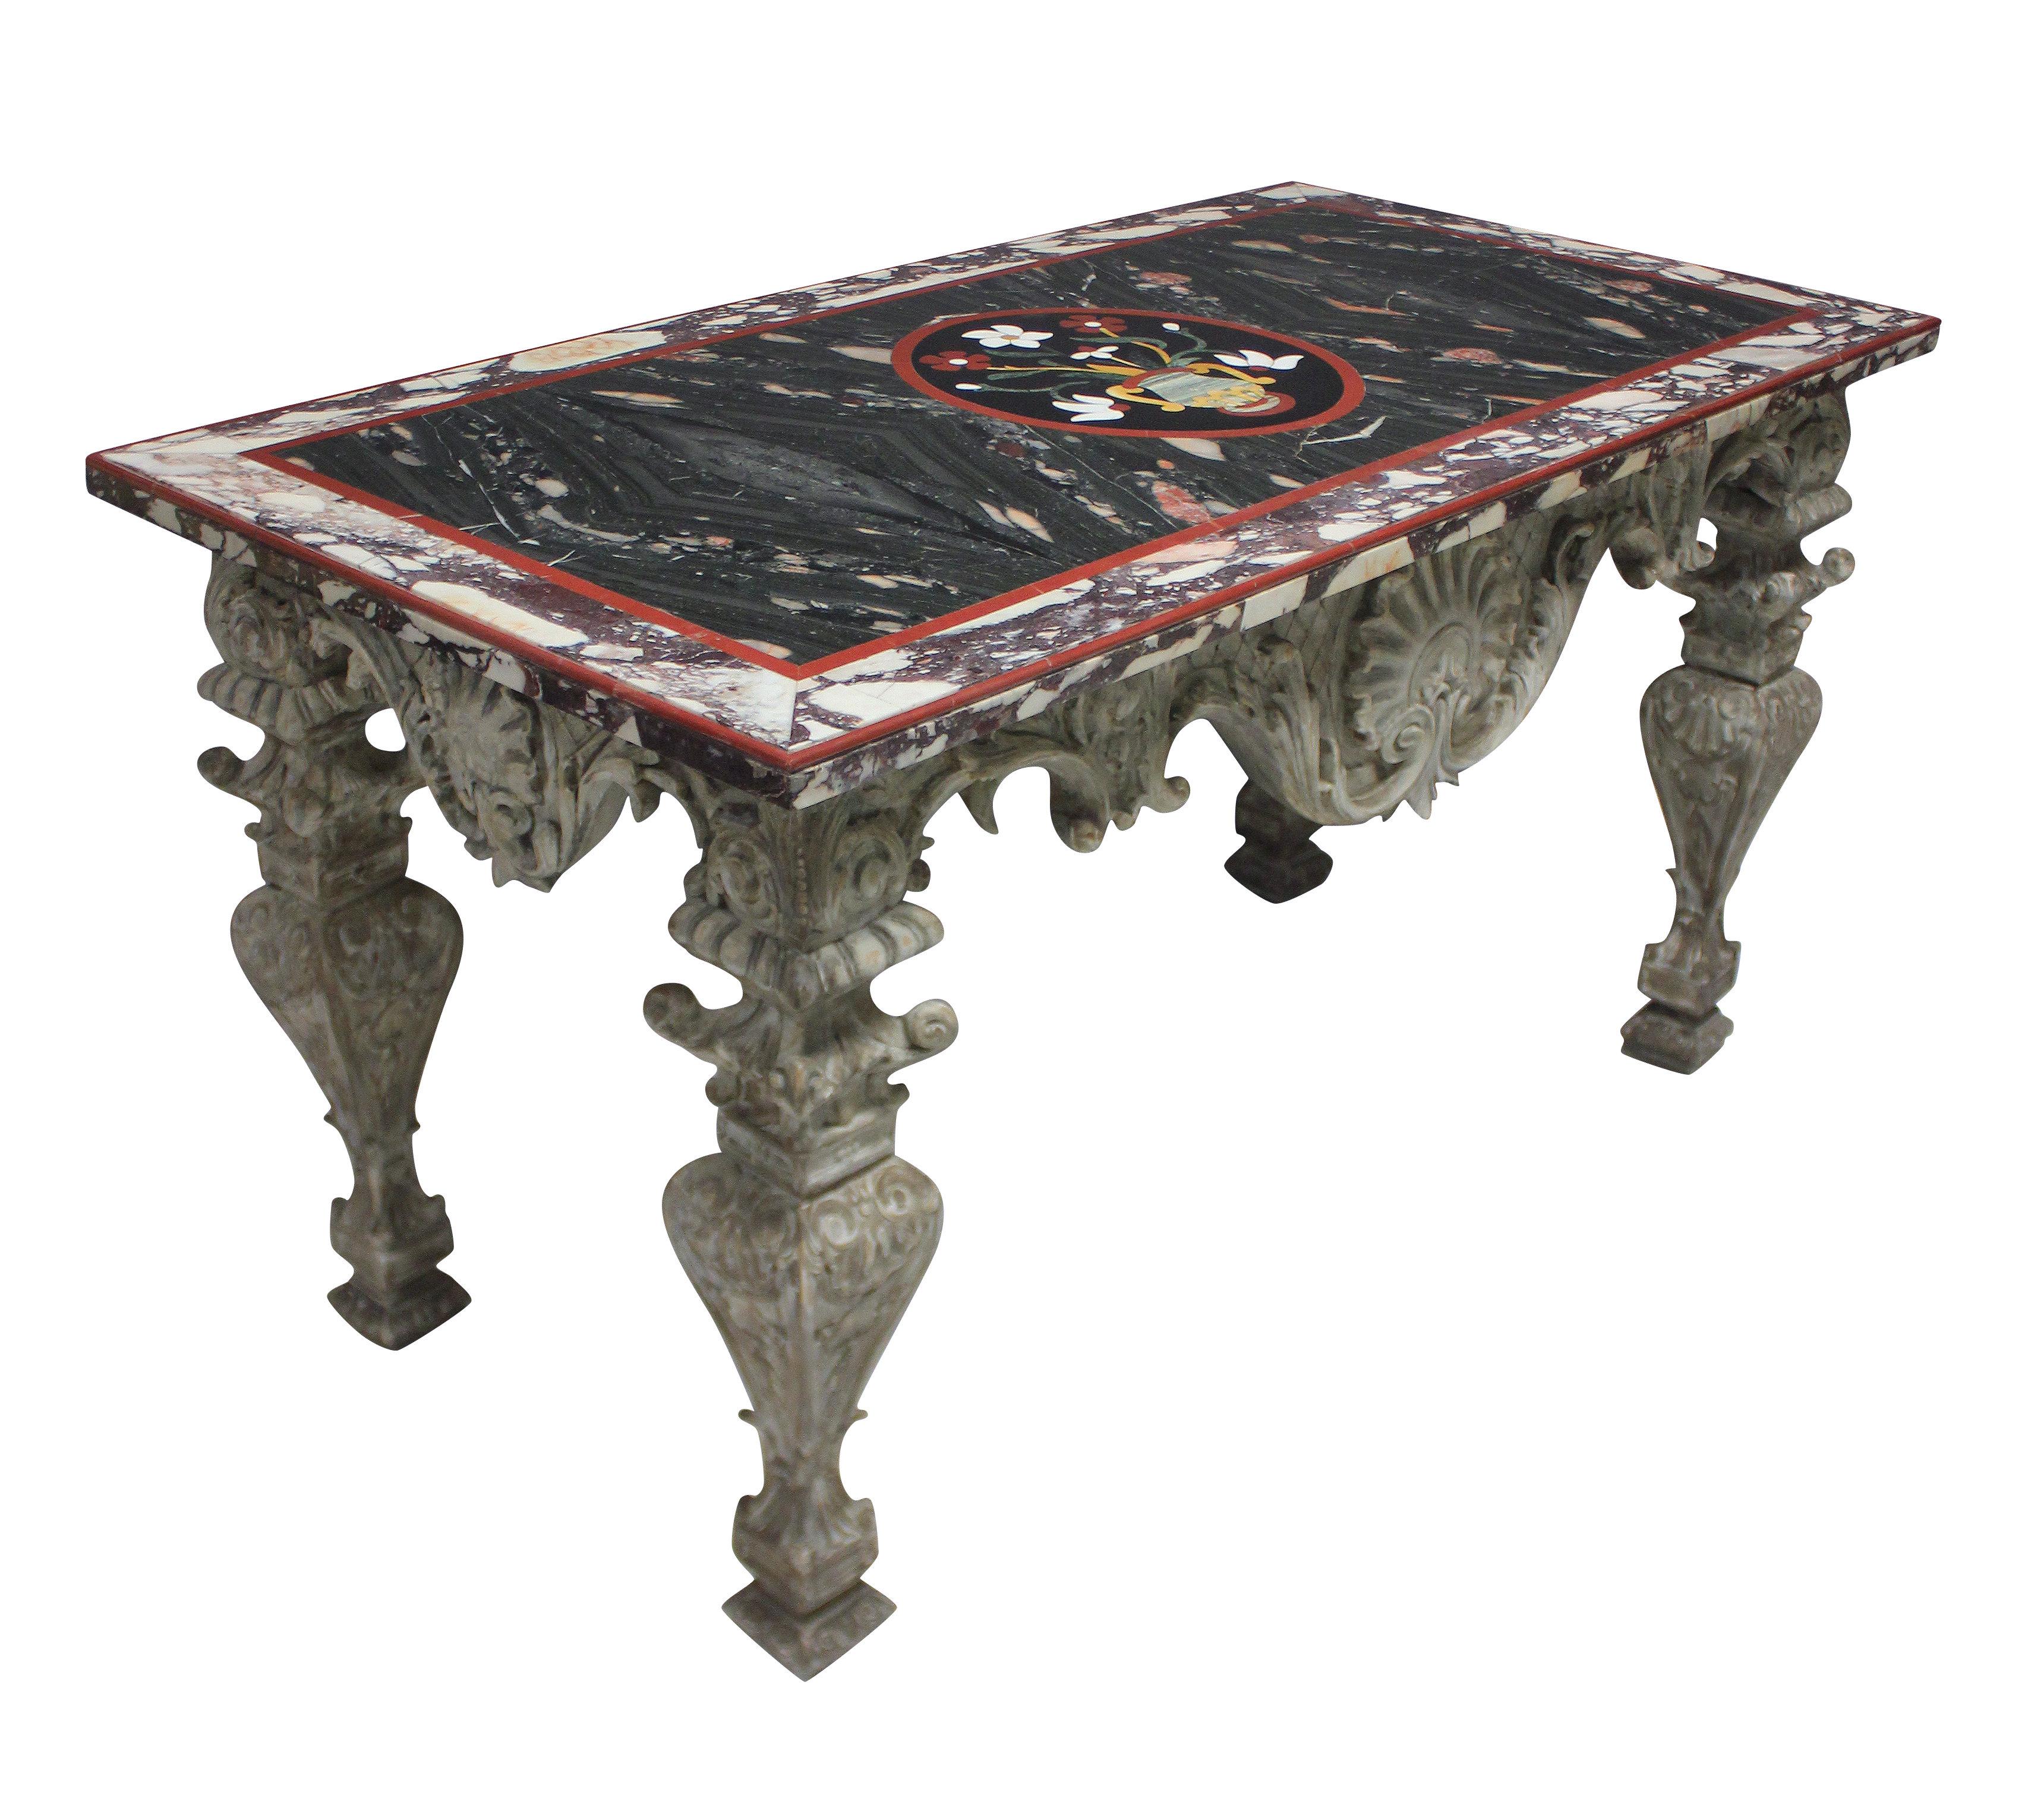 An Italian Baroque heavily carved and distressed painted walnut centre table. With shell and acanthus detailing throughout, supporting a fine pietra dura marble top. The top in various marbles & hardstones, with a shaped carnelian edge, with a